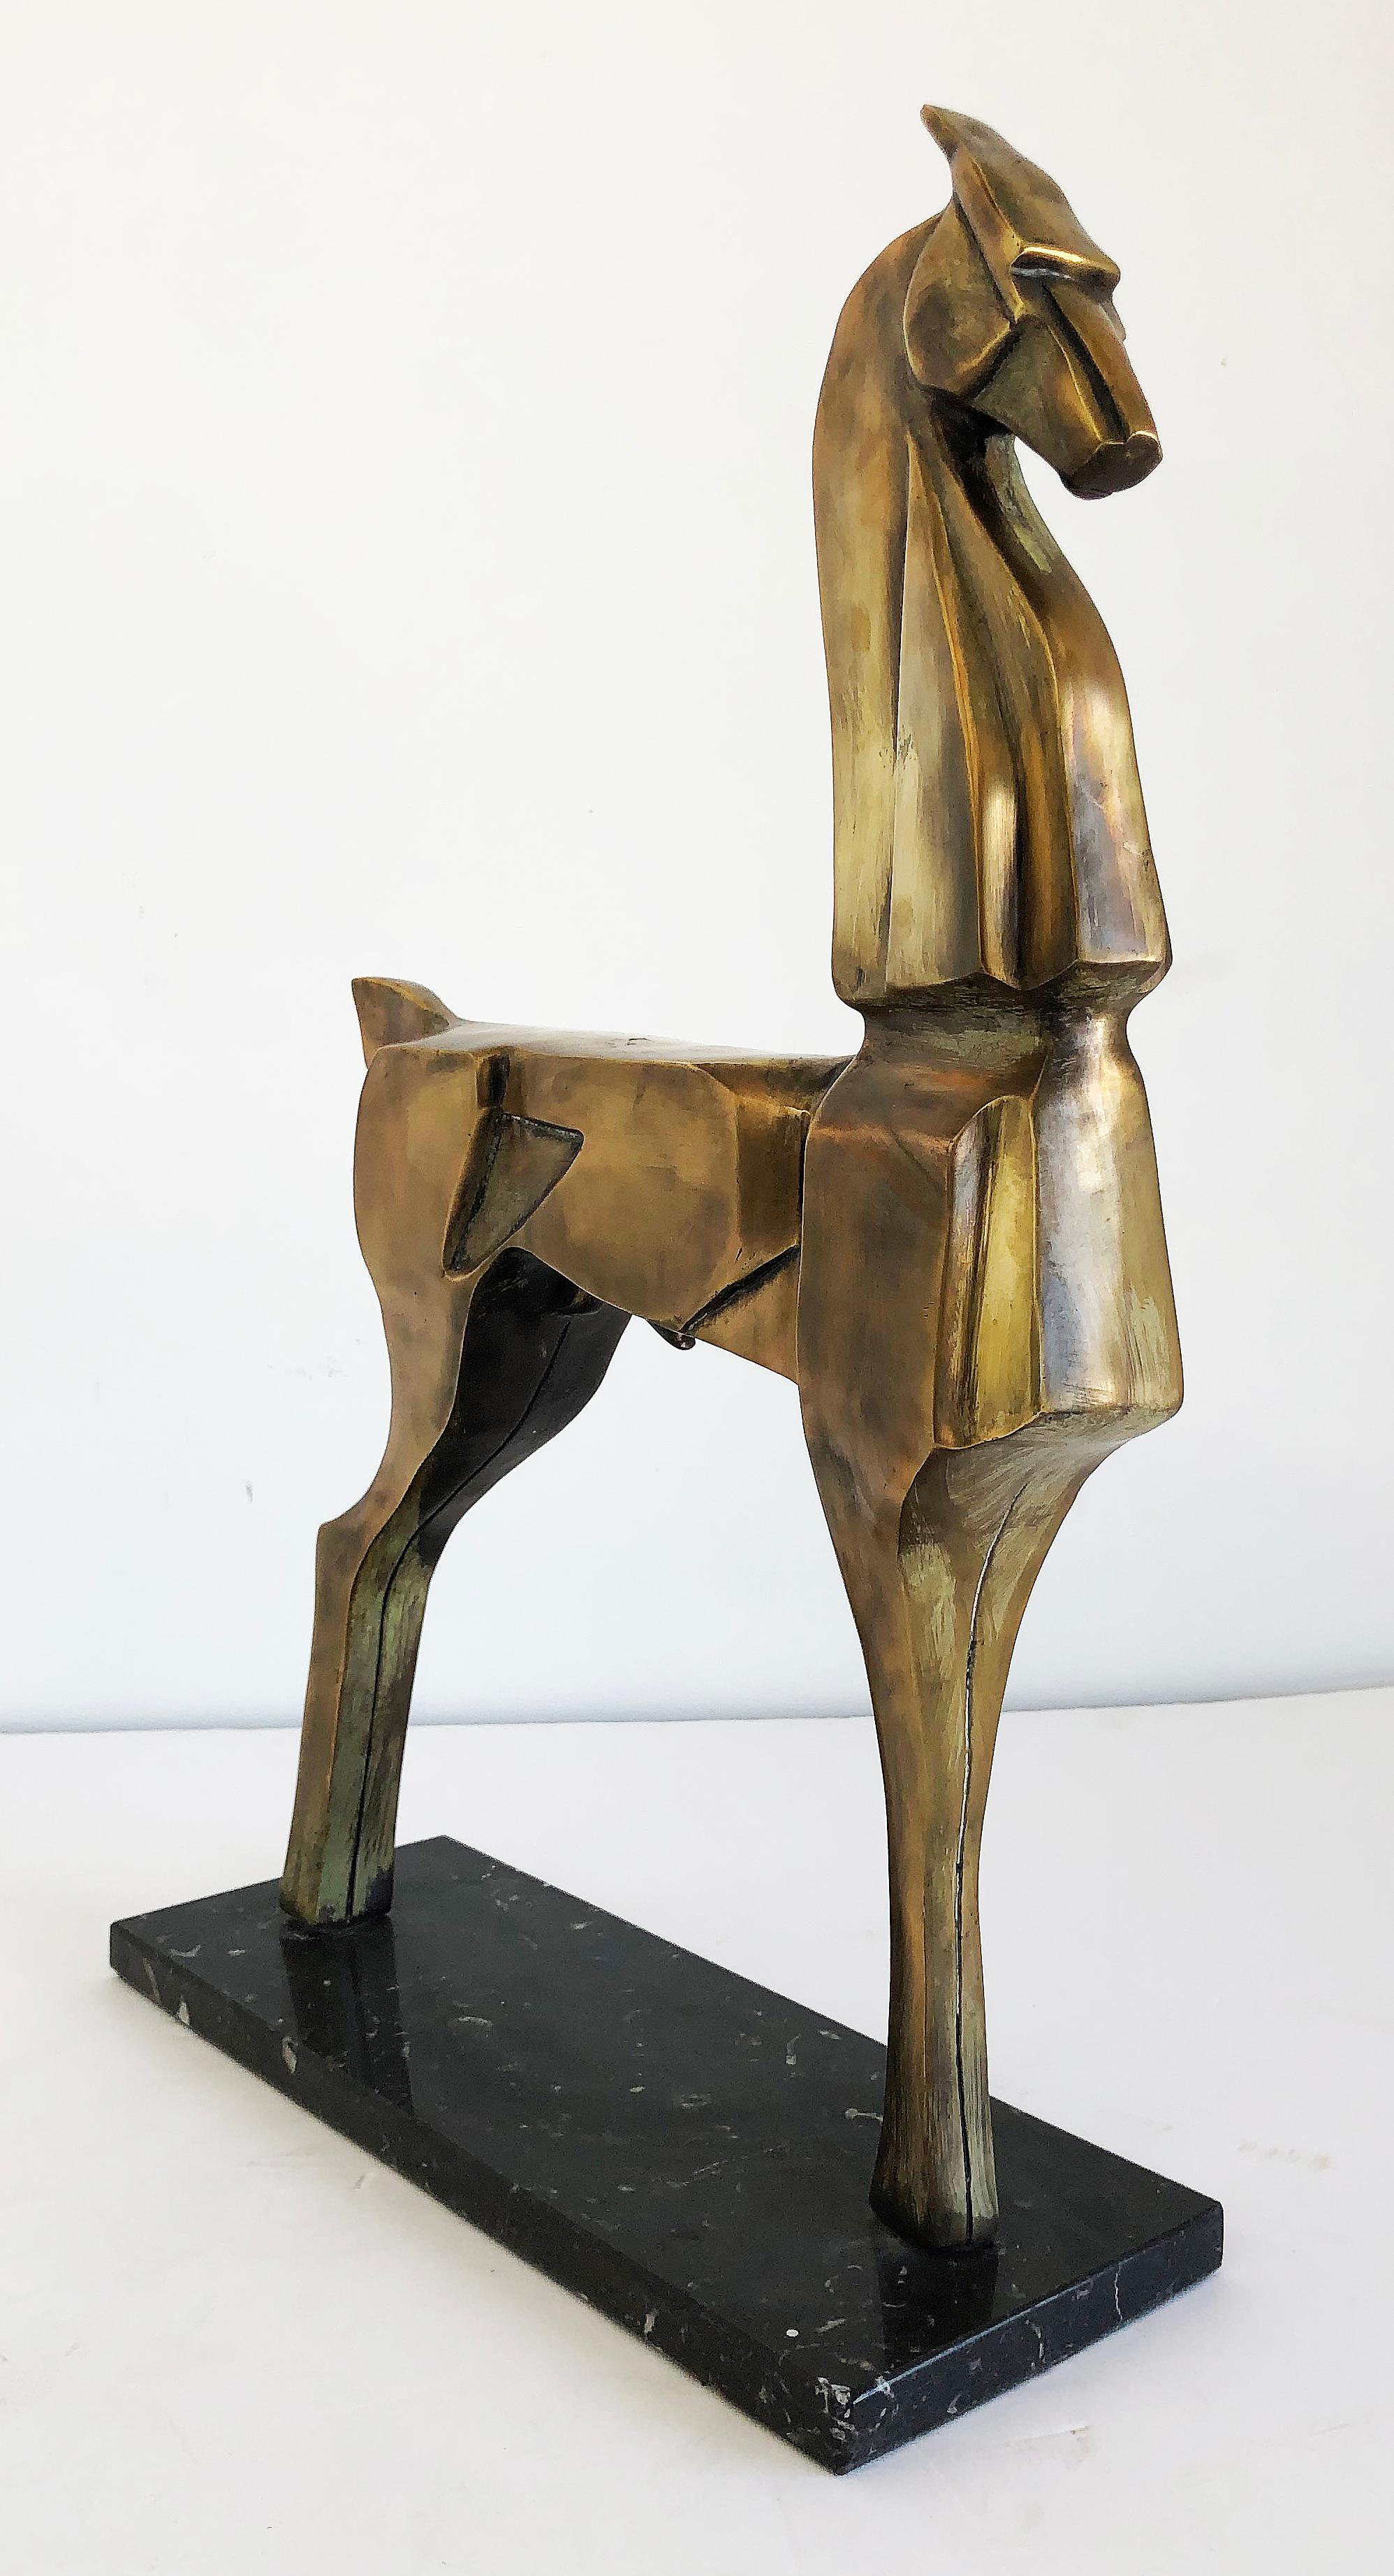 Large bronze Art Deco style abstract horse sculpture

Offered for sale is a very large vintage Art Deco-influenced bronze horse sculpture on a black marble base. The stylized design has Cubist lines and a nice bronze patina. This is a striking